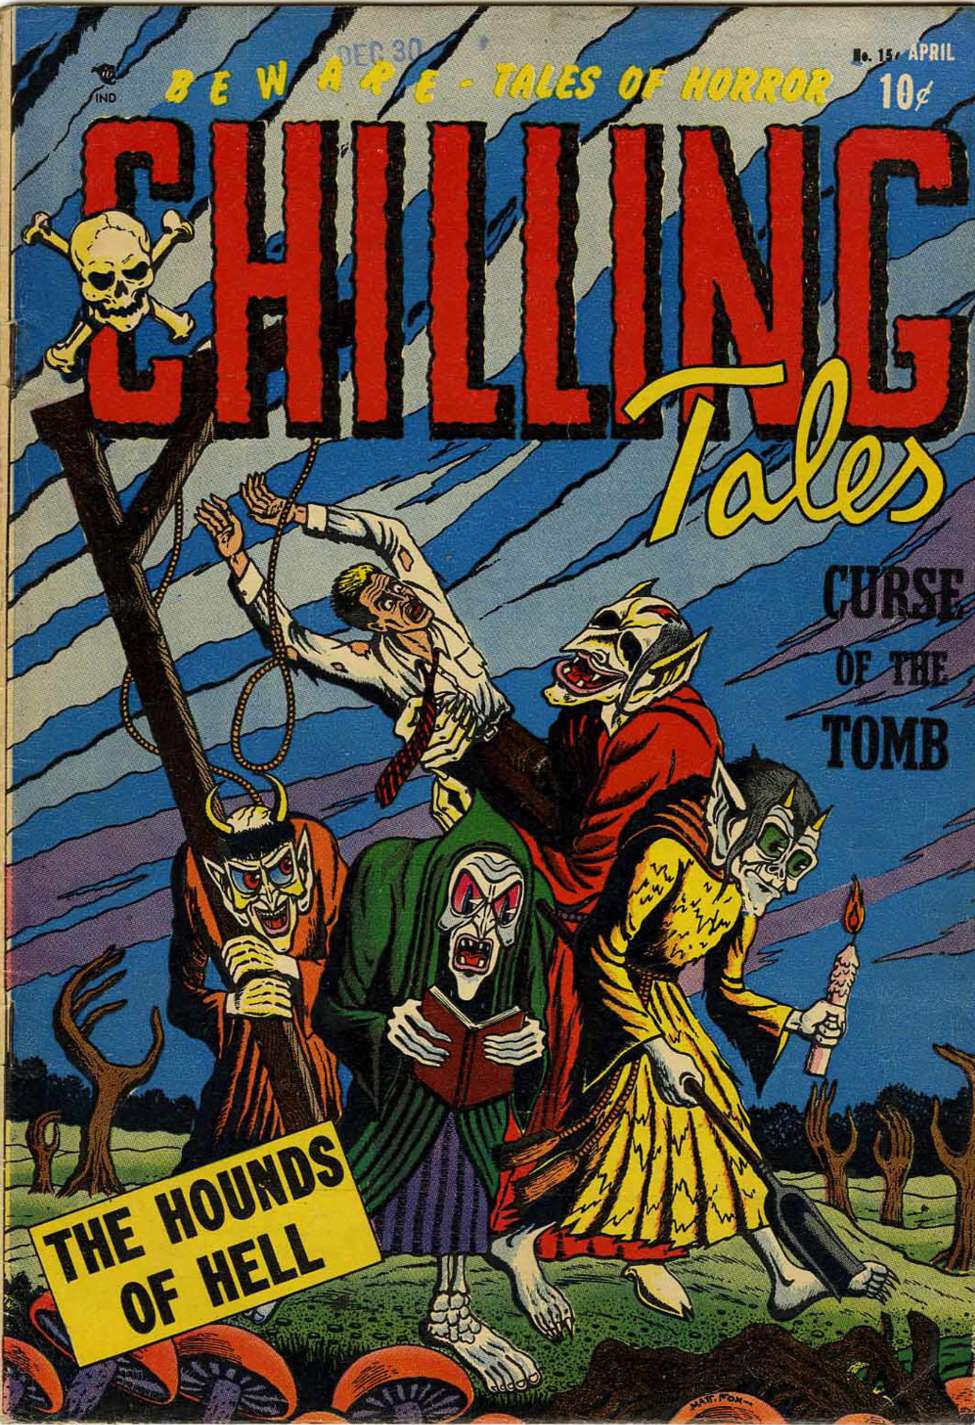 Book Cover For Chilling Tales 15 - Version 2